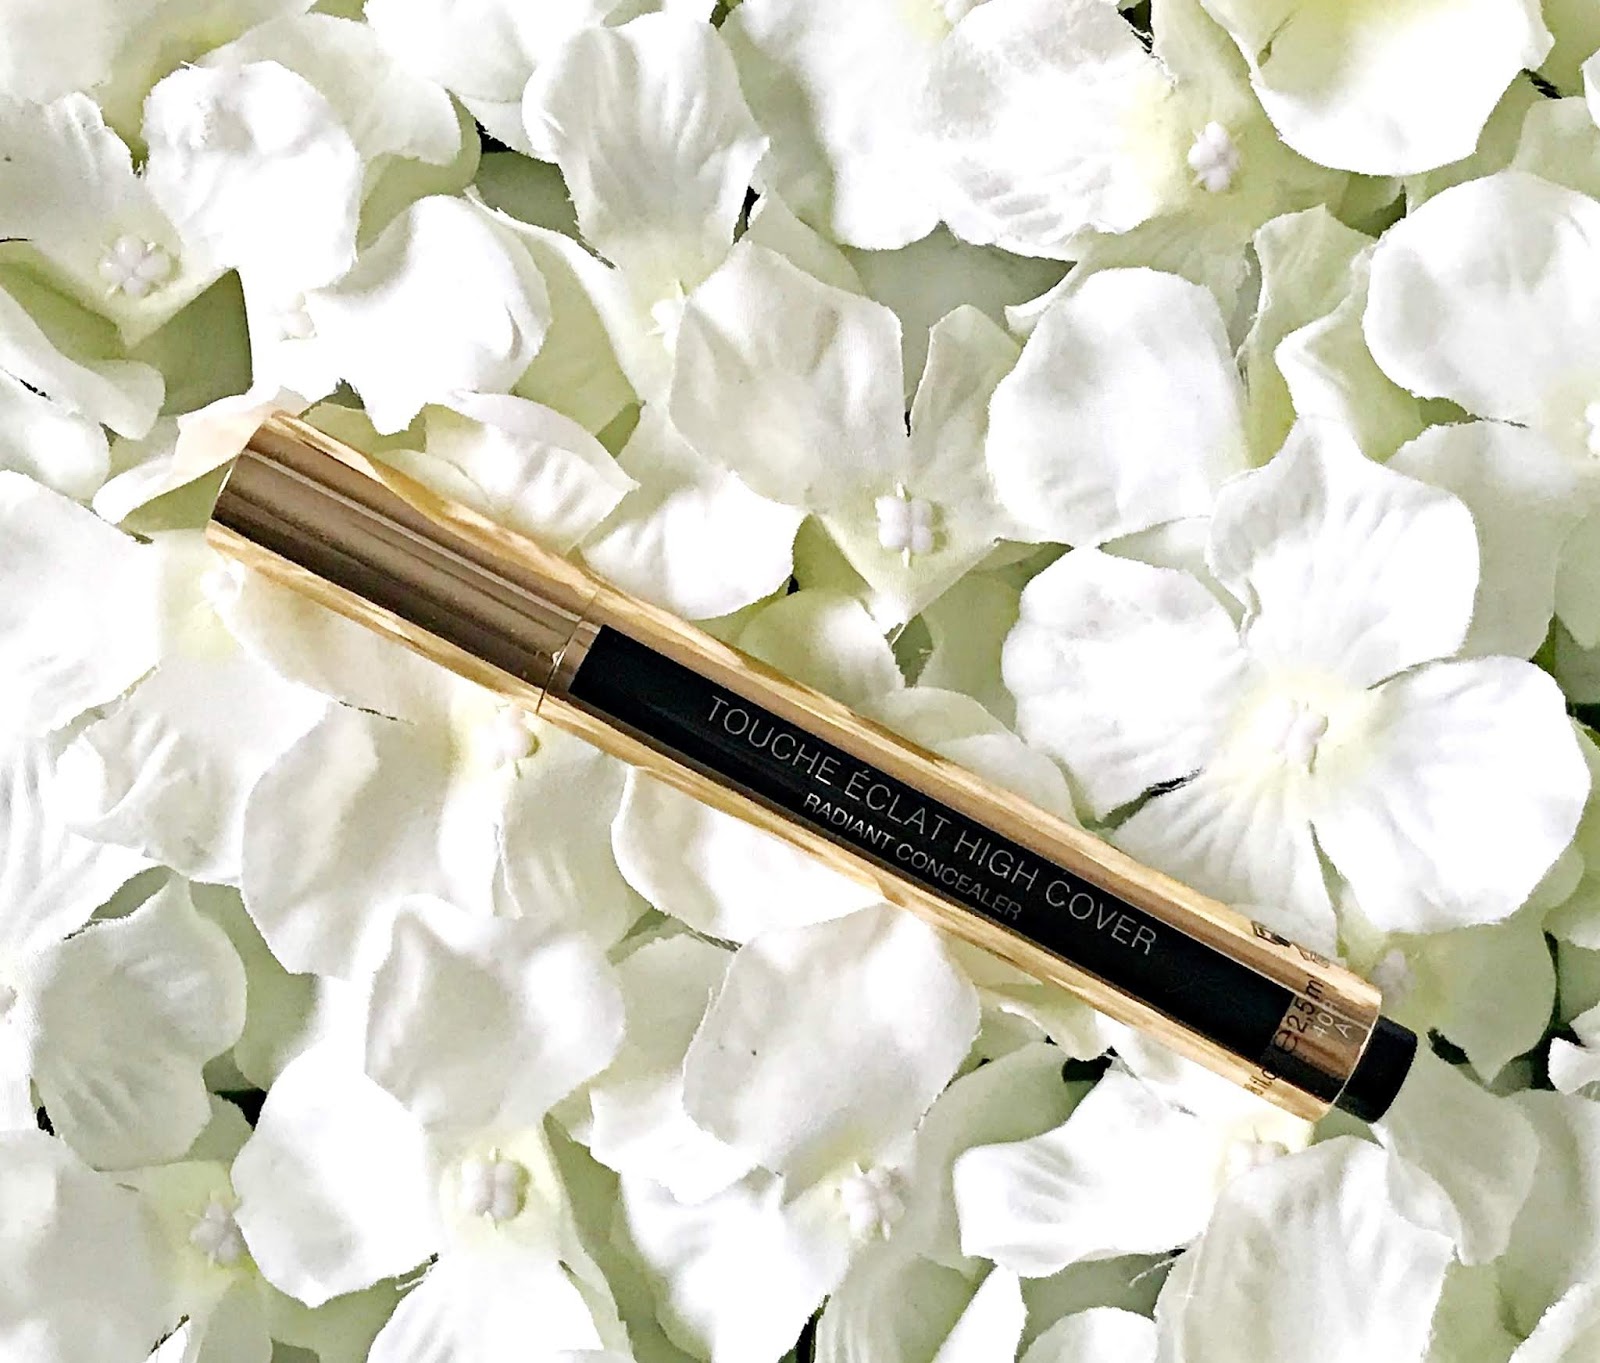 YSL Touche Éclat High Cover Concealer Review